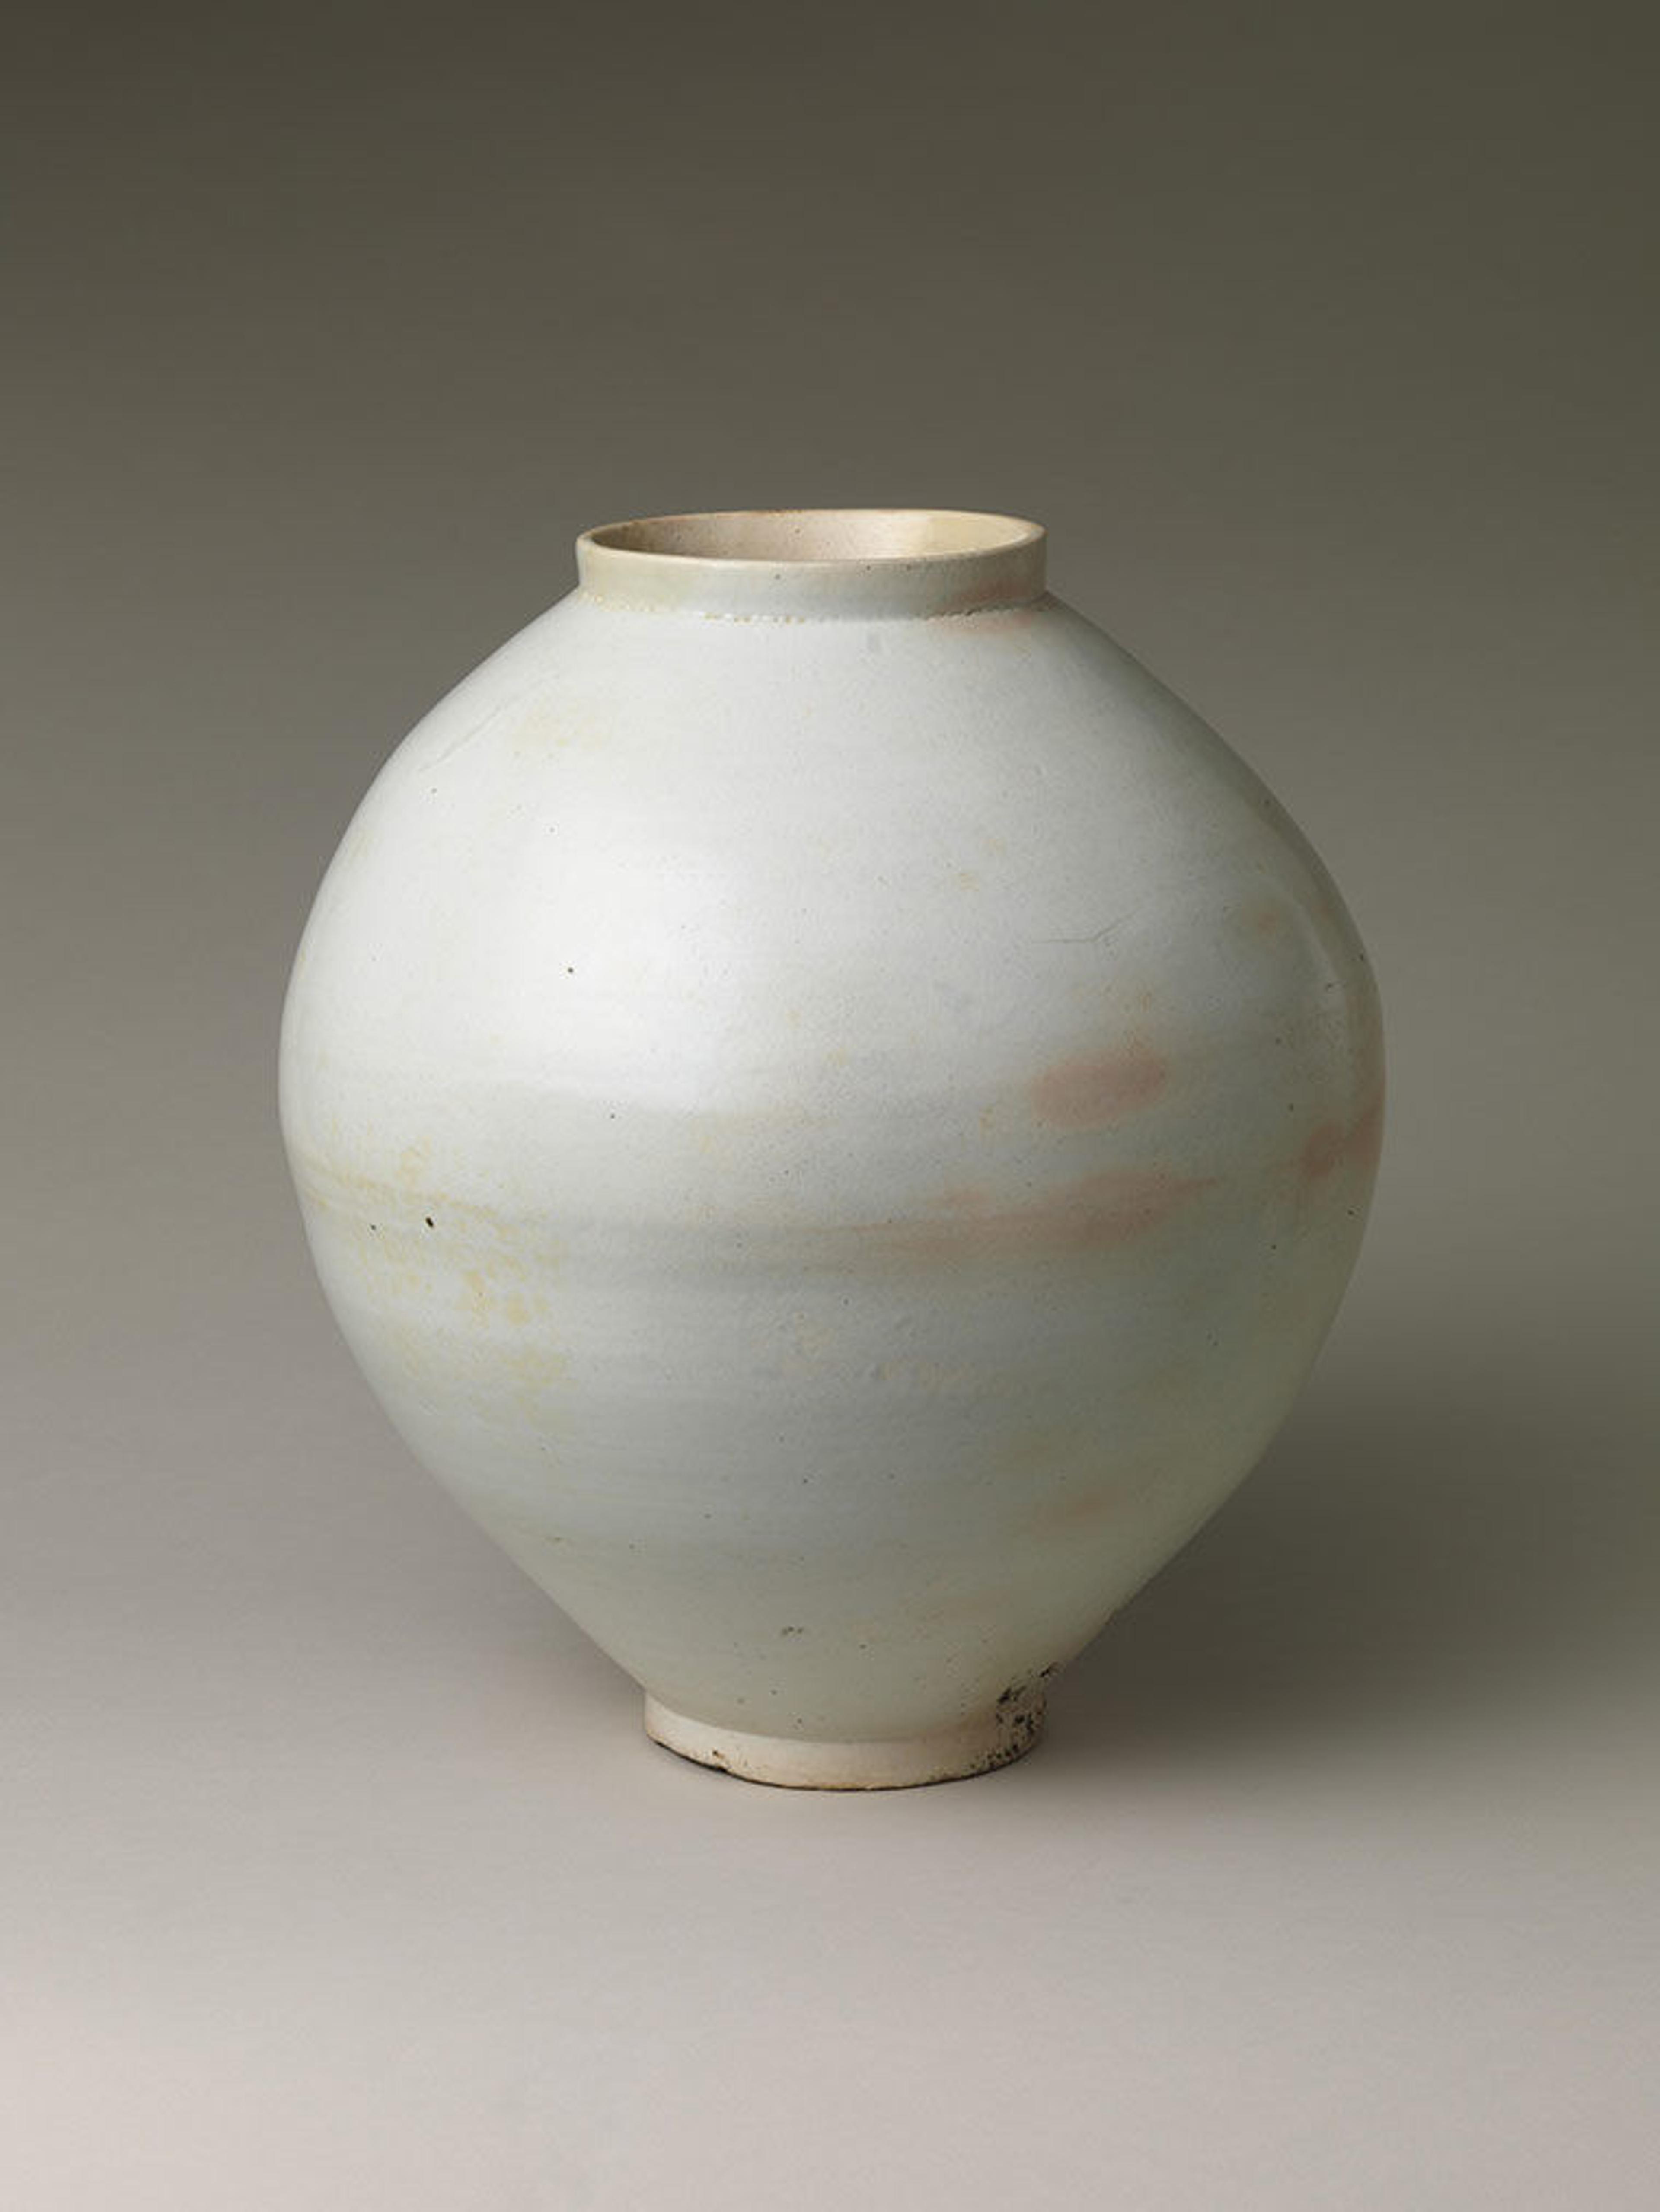 A large, white jar with some peach colored spots around the center